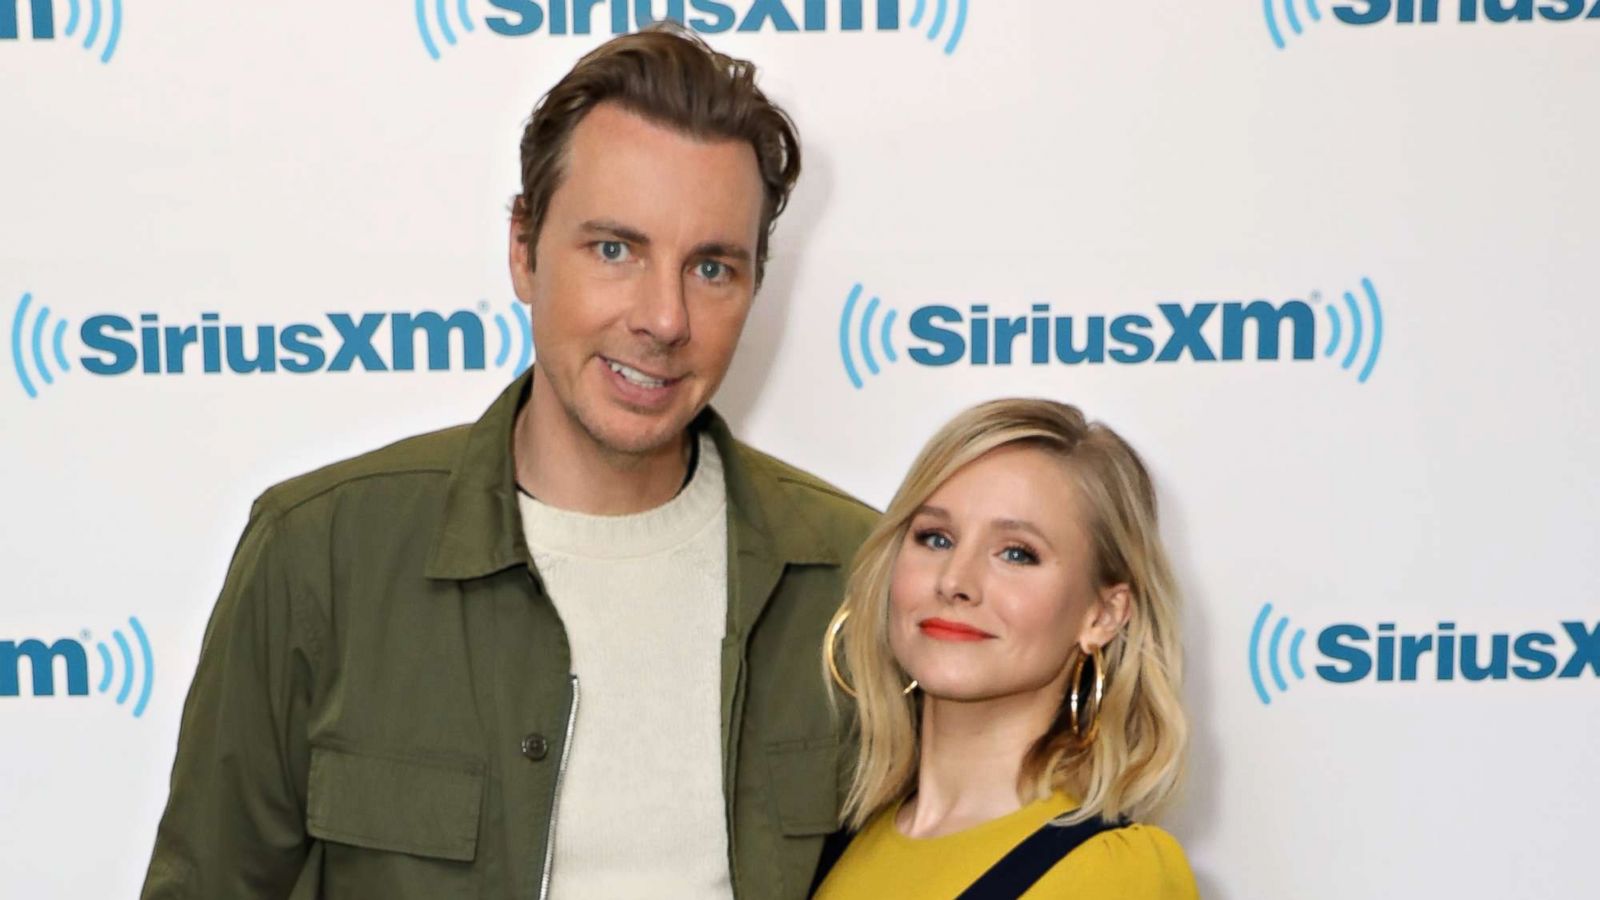 PHOTO: Actors Dax Shepard and Kristen Bell visit the SiriusXM Studios, March 22, 2017, in New York City.